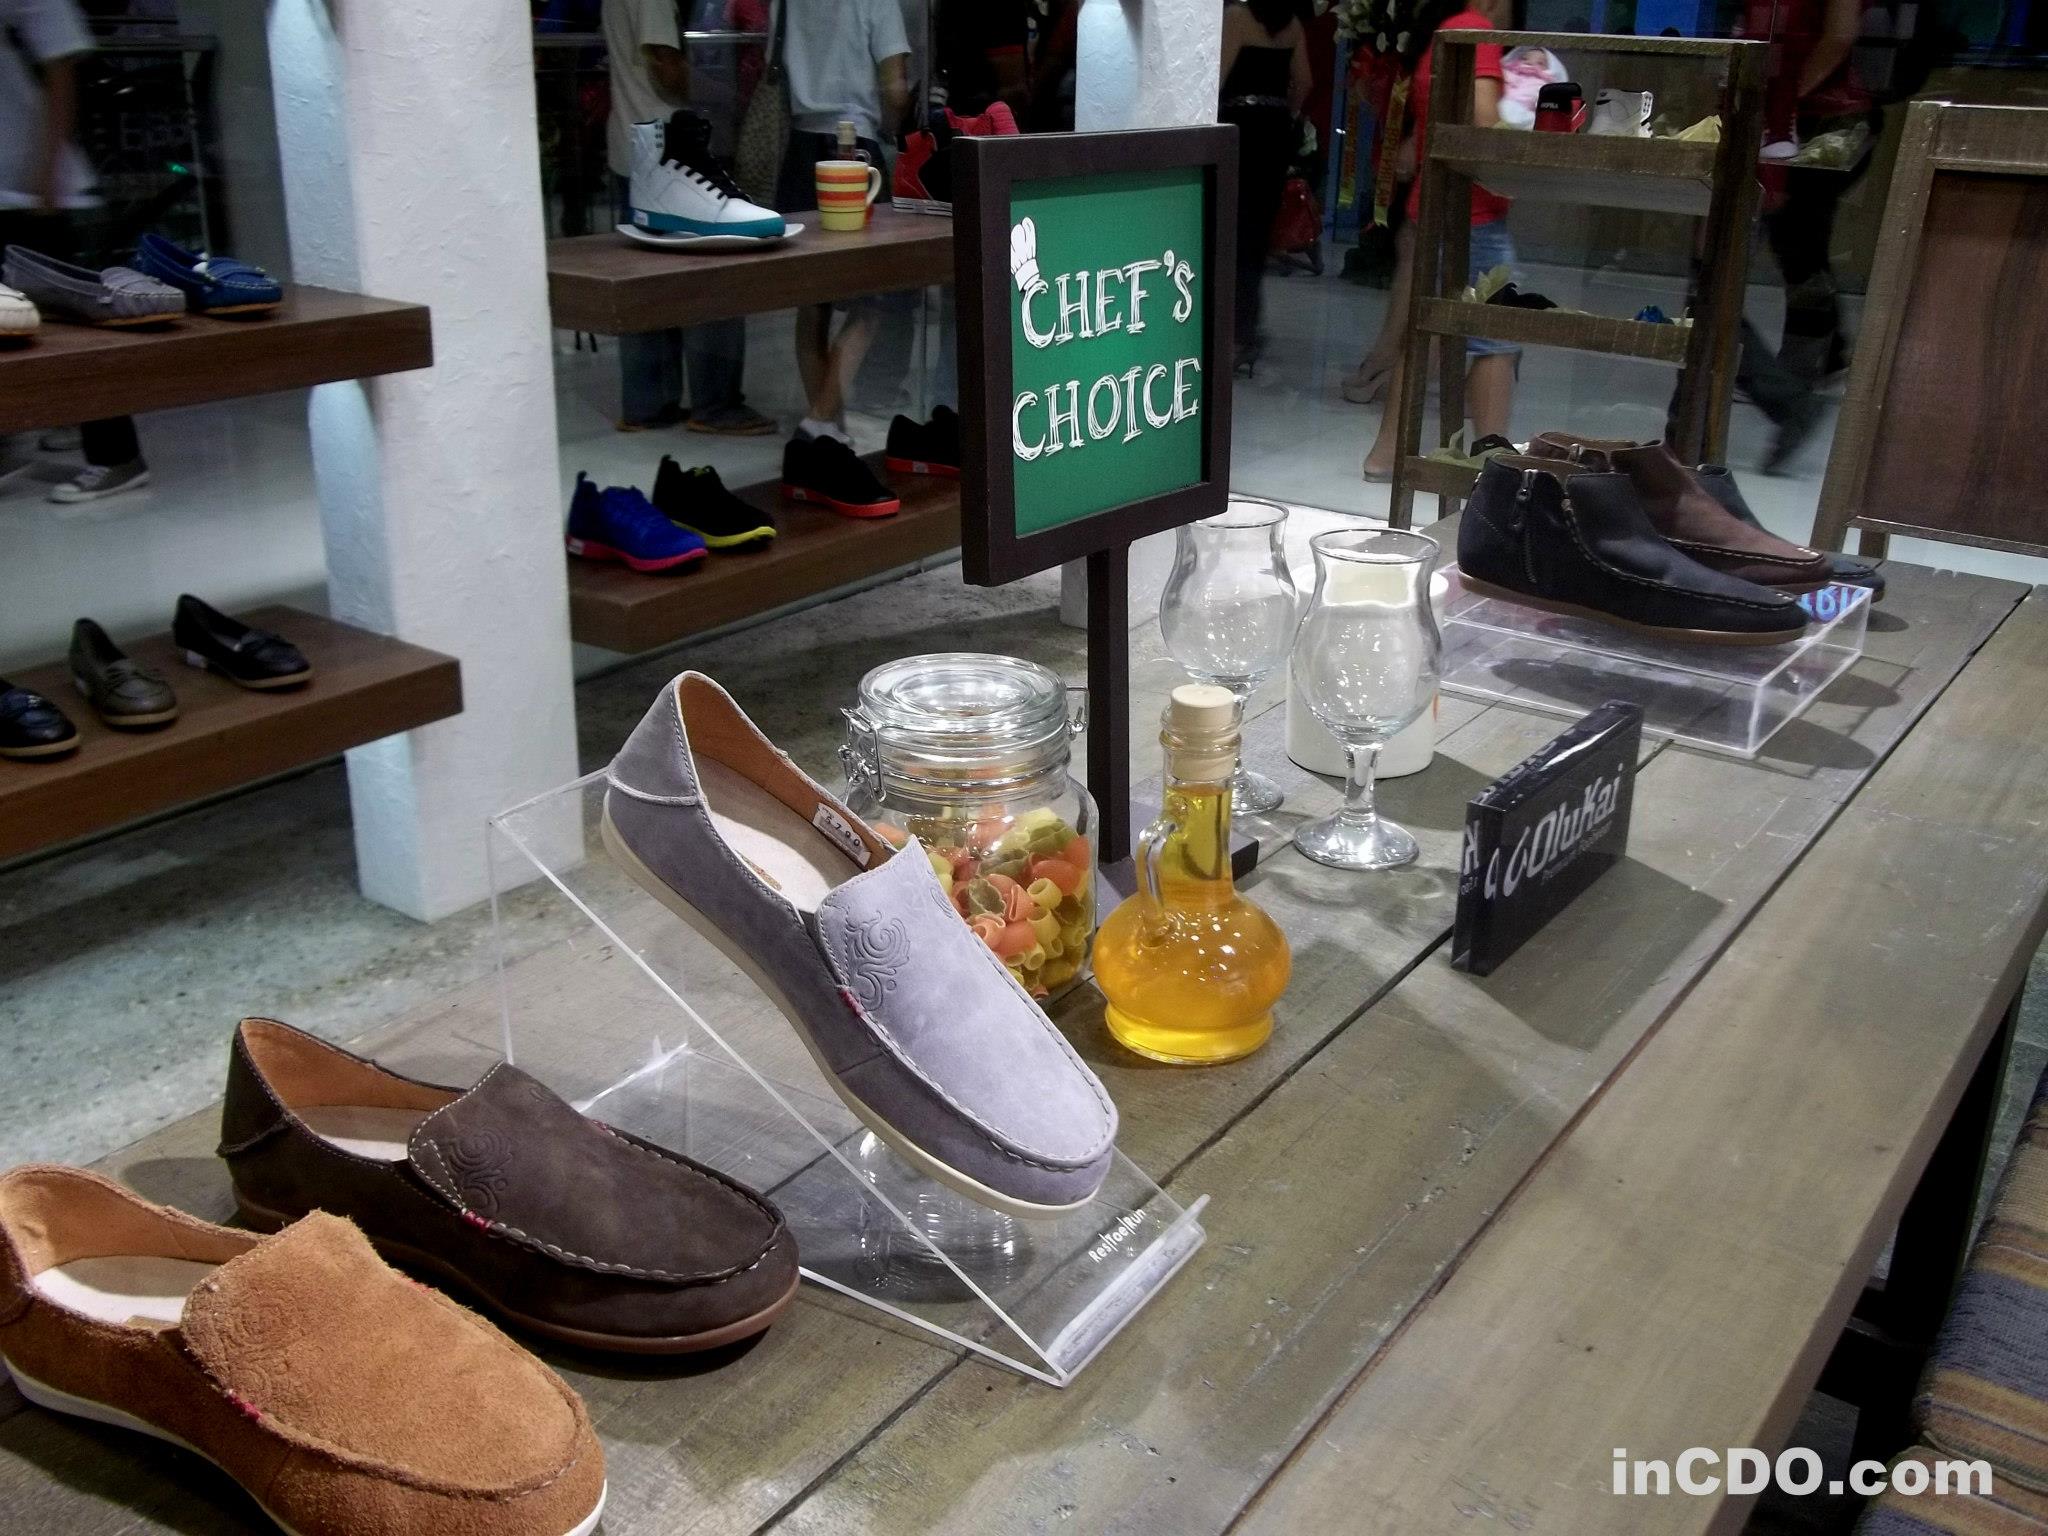 Res|Toe|Run in CDO: Your Appetite for Shoes